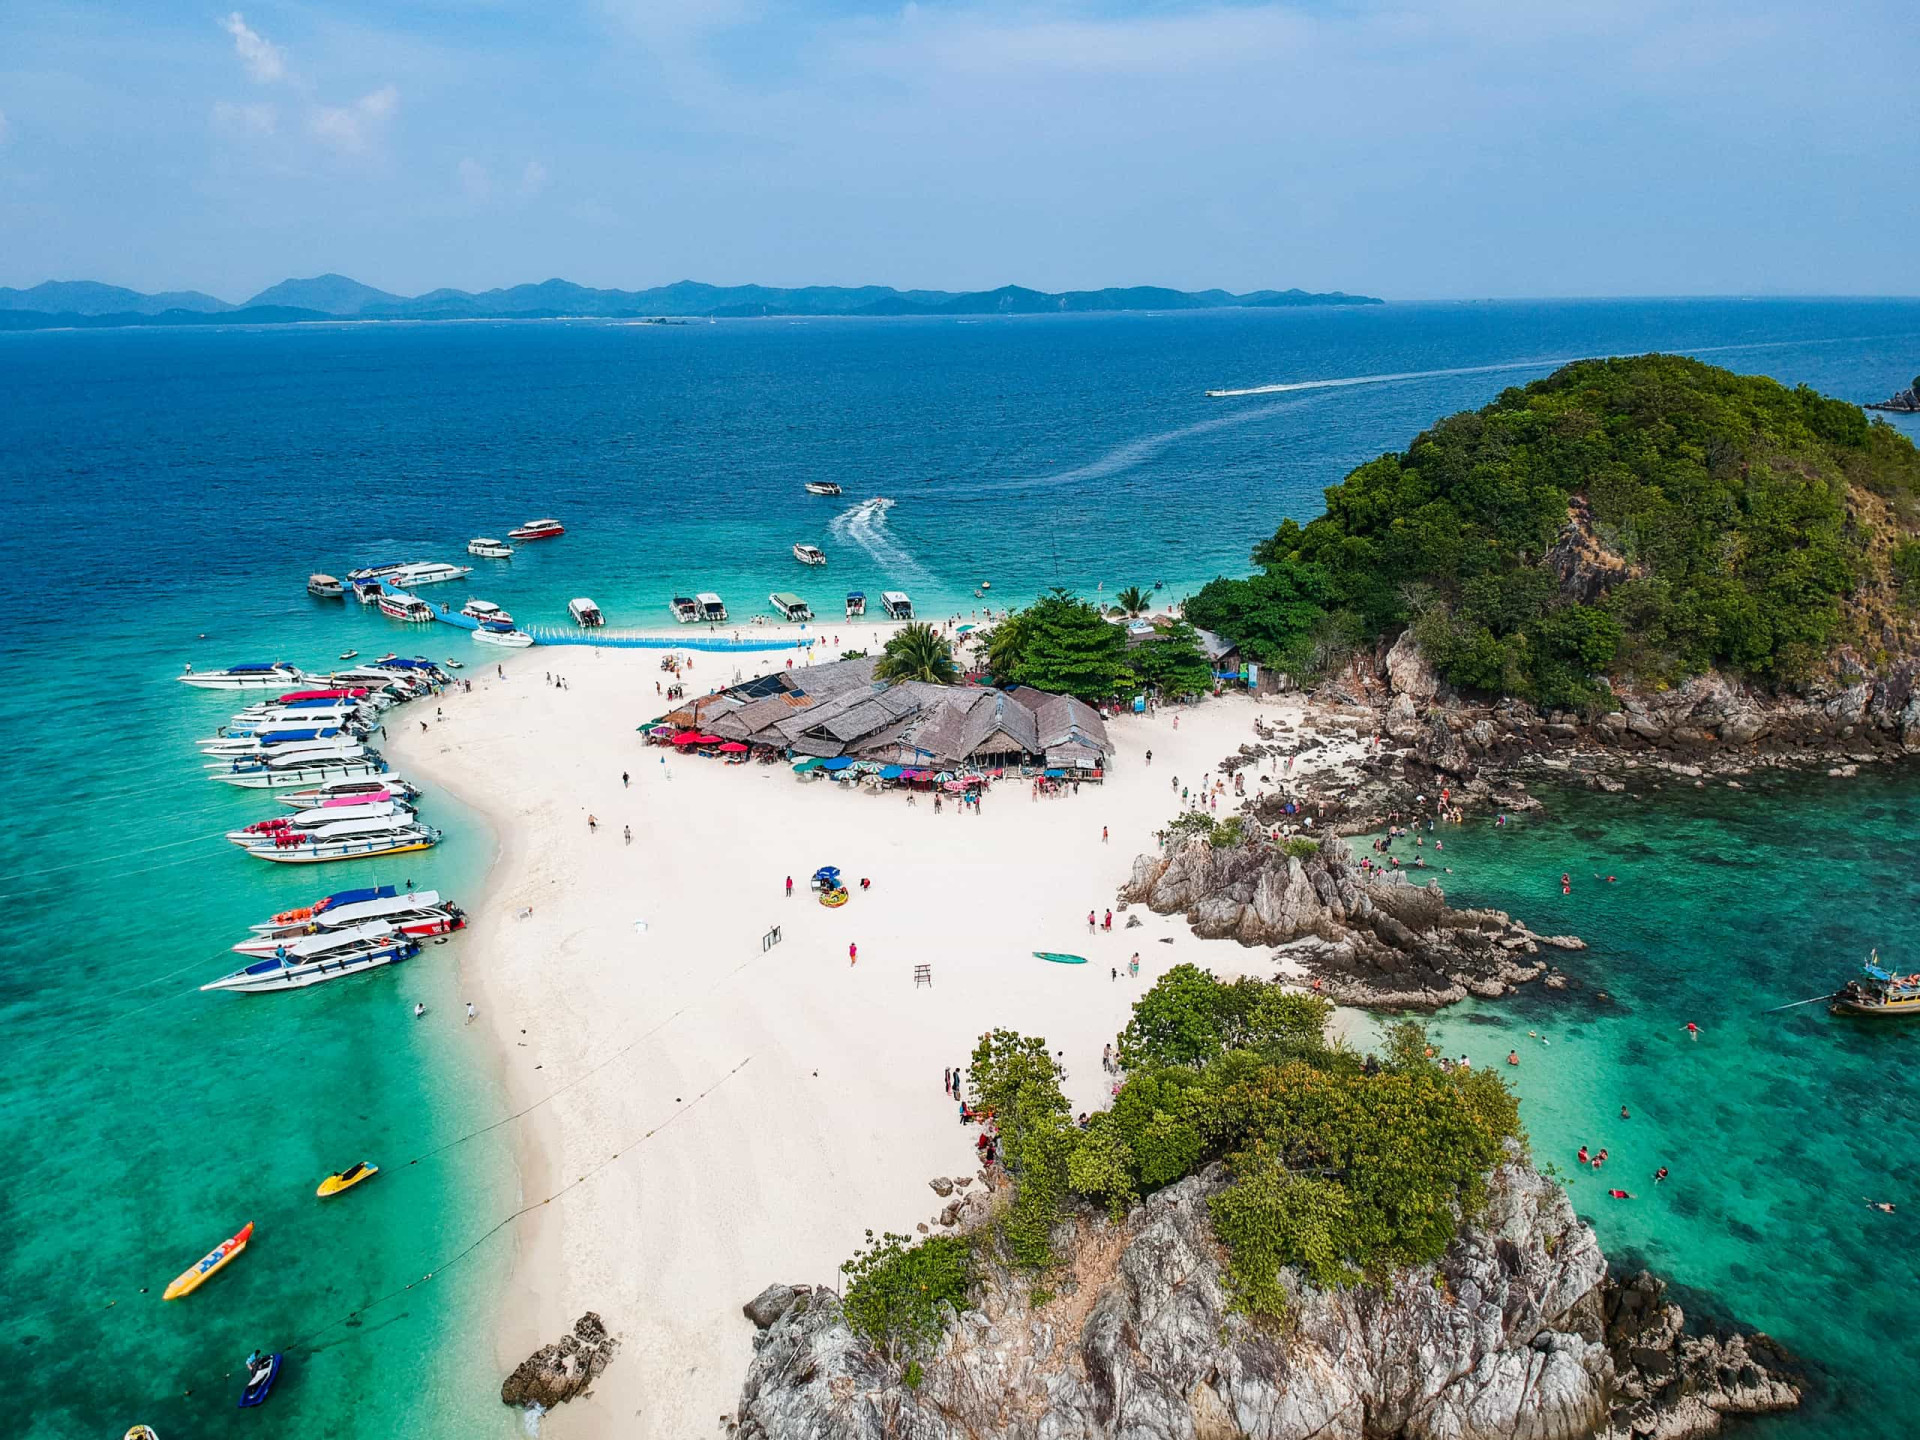 <p>While the closure of Maya Bay remains the most high profile of the Thai authorities' efforts to stem overcrowding, the islands of Koh Khai Nok (pictured), Koh Khai Nui, Koh Tachai, and Koh Khai Nai are also closed indefinitely to tourists.</p><p>You may also like:<a href="https://www.starsinsider.com/n/242009?utm_source=msn.com&utm_medium=display&utm_campaign=referral_description&utm_content=668561en-my"> Hollywood's most controversial movie castings</a></p>